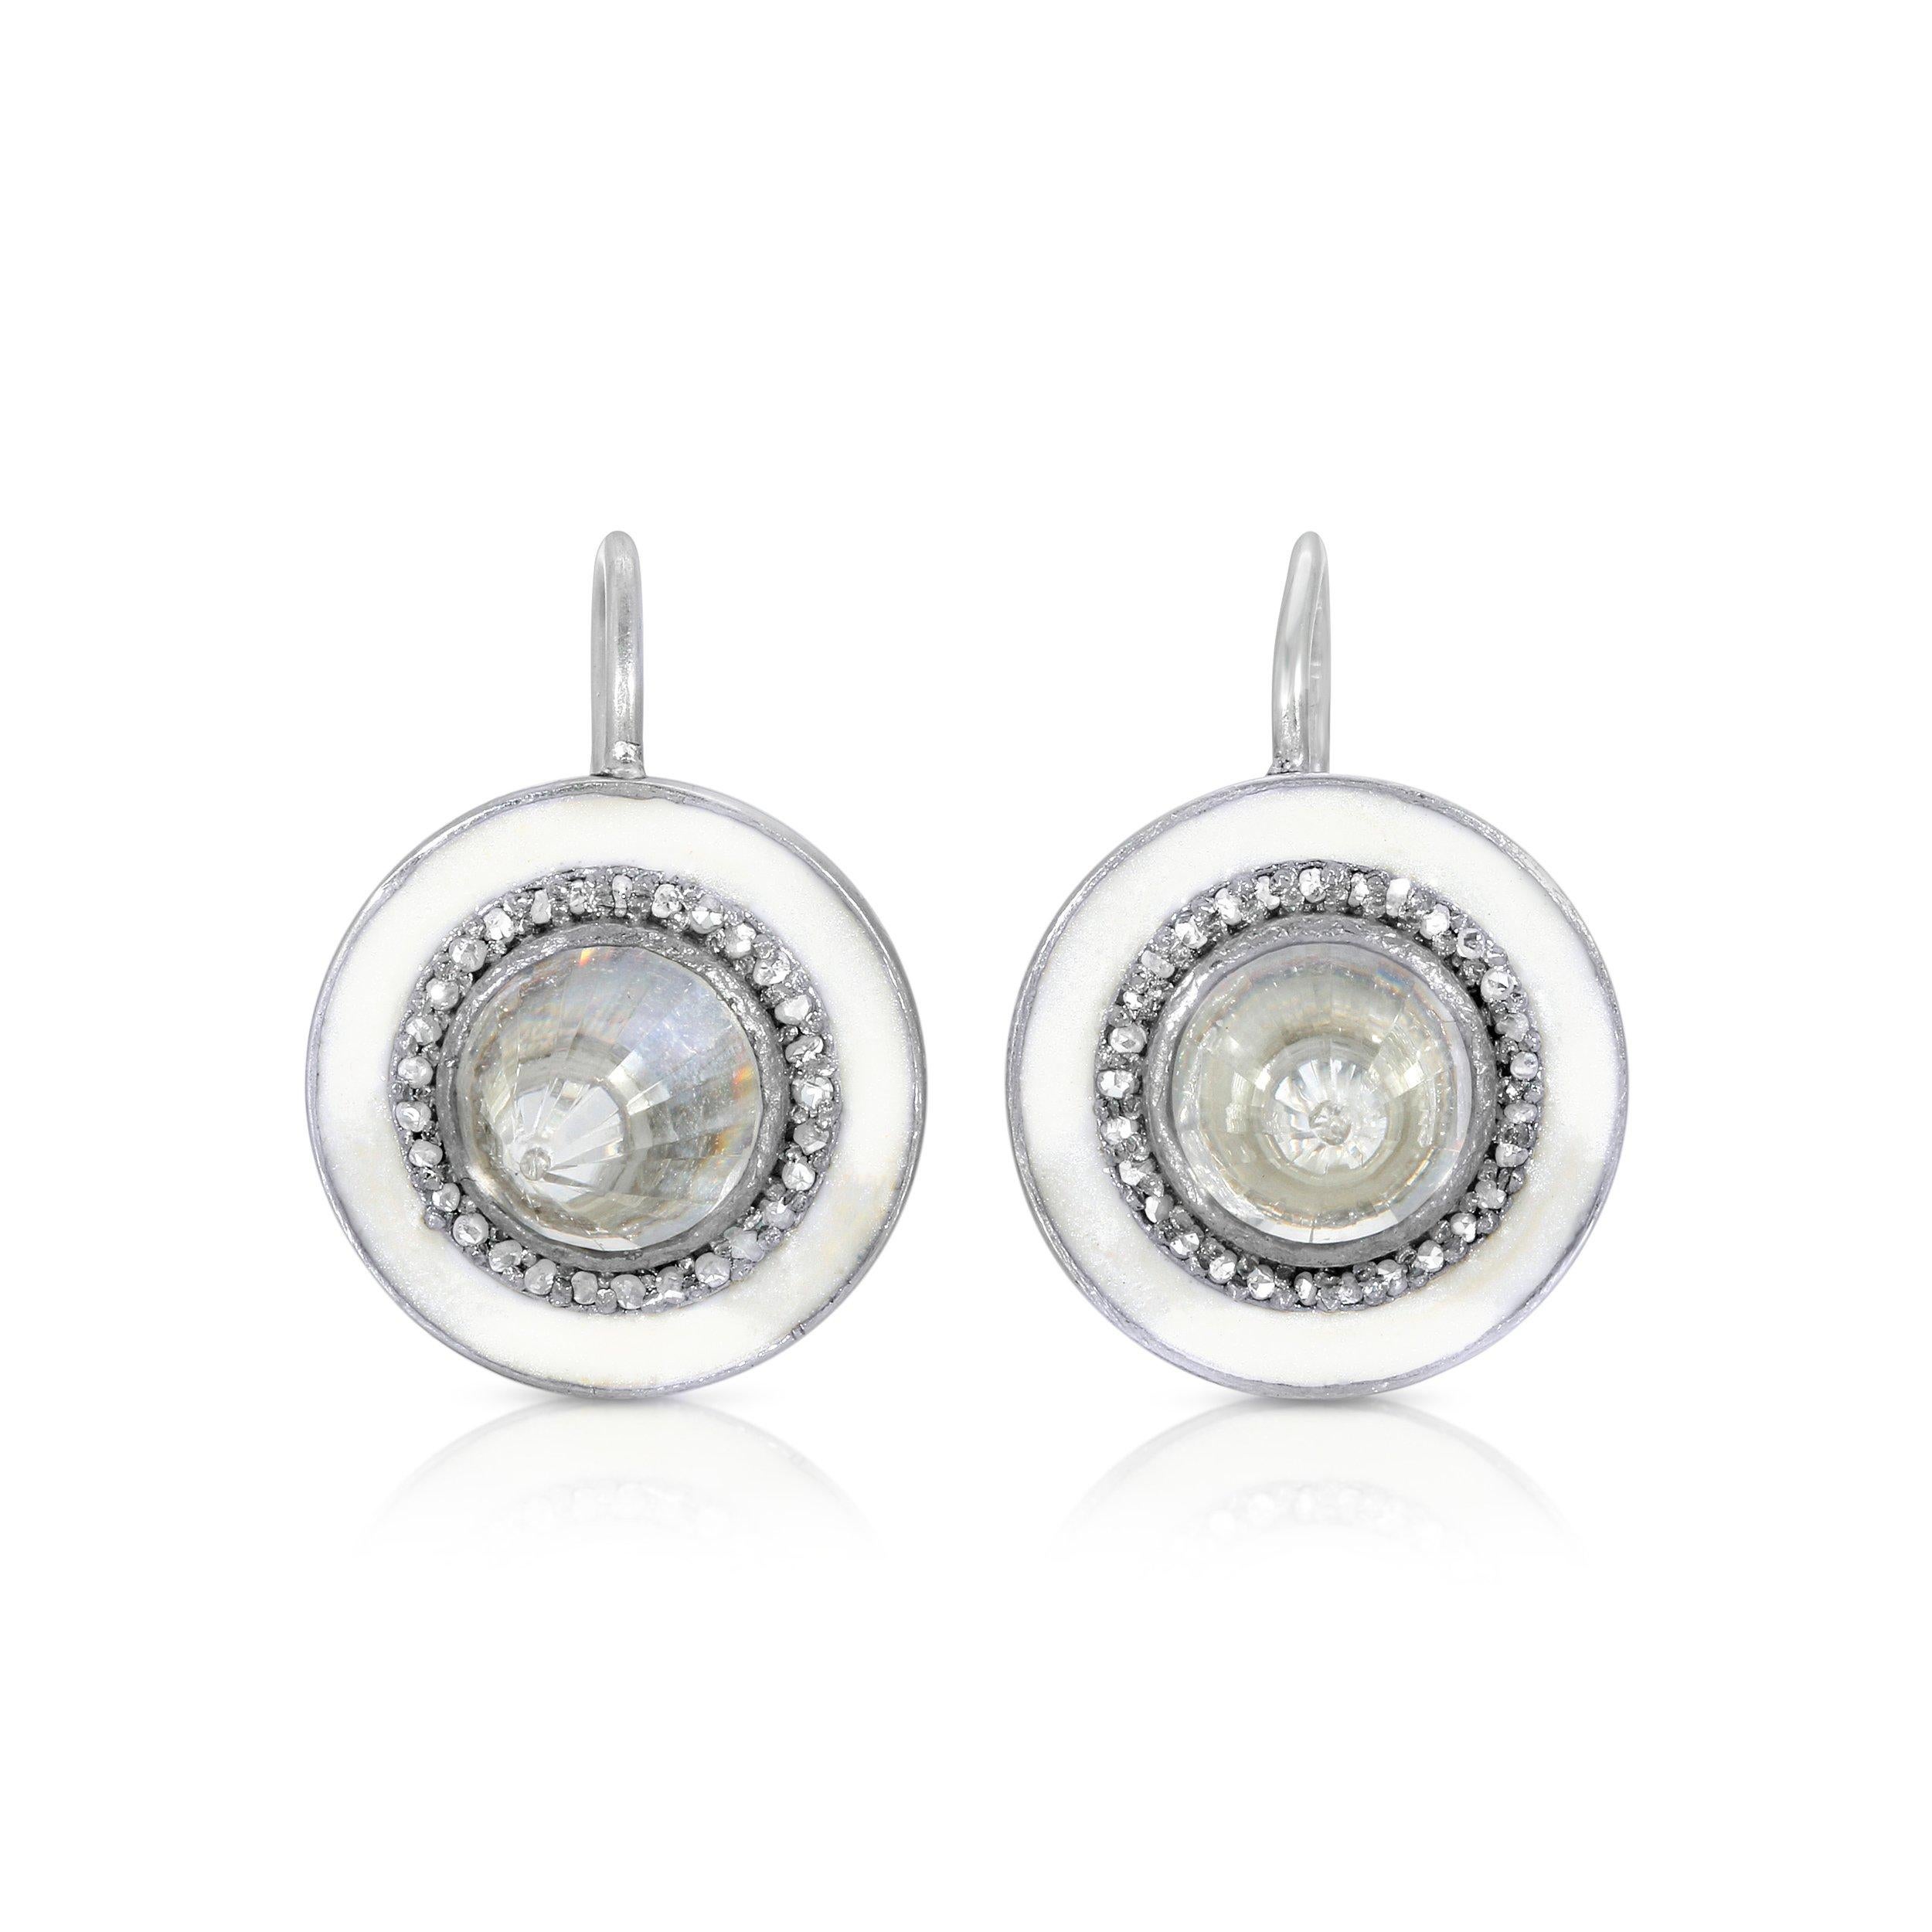 Beautifully faceted glacier white Crystal Quartz points in an iridescent halo of Mother of Pearl white enamel set with sparkling white Diamonds in 14 karat white gold and silver drop earrings.

- Natural White Crystal Quartz weight approx 10.50